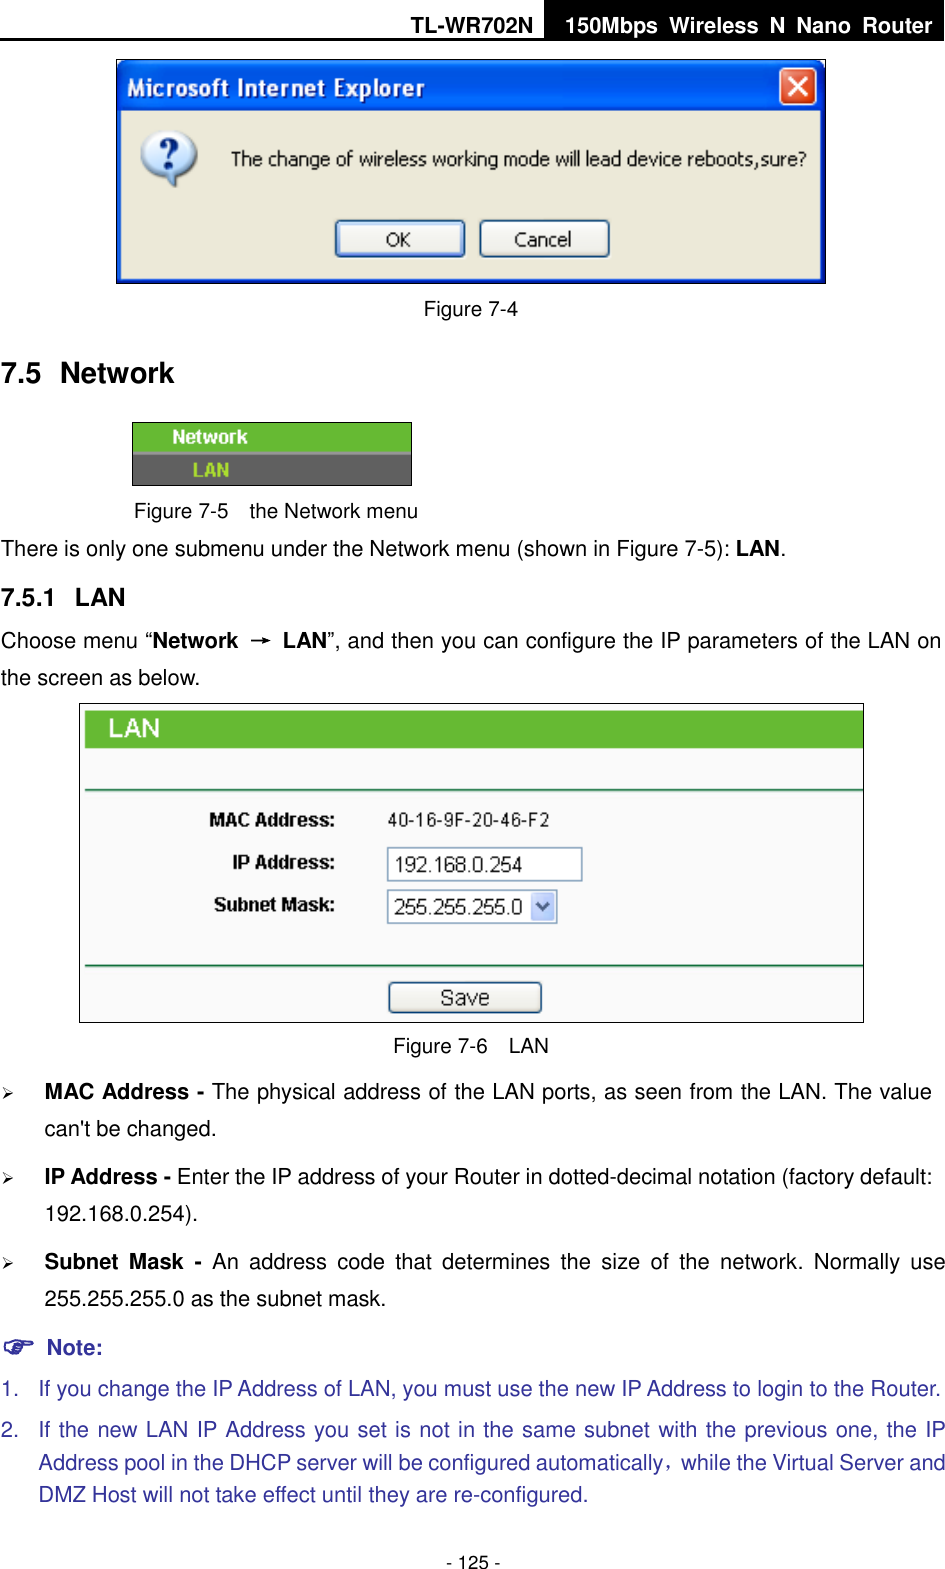 TL-WR702N 150Mbps  Wireless  N  Nano  Router  - 125 -  Figure 7-4 7.5  Network  Figure 7-5  the Network menu There is only one submenu under the Network menu (shown in Figure 7-5): LAN.  7.5.1  LAN Choose menu “Network  →  LAN”, and then you can configure the IP parameters of the LAN on the screen as below.  Figure 7-6  LAN  MAC Address - The physical address of the LAN ports, as seen from the LAN. The value can&apos;t be changed.  IP Address - Enter the IP address of your Router in dotted-decimal notation (factory default: 192.168.0.254).  Subnet  Mask  -  An  address  code  that  determines  the  size  of  the  network.  Normally  use 255.255.255.0 as the subnet mask.    Note: 1.  If you change the IP Address of LAN, you must use the new IP Address to login to the Router.   2.  If the new LAN IP Address you set is not in the same subnet with the previous one, the IP Address pool in the DHCP server will be configured automatically，while the Virtual Server and DMZ Host will not take effect until they are re-configured. 